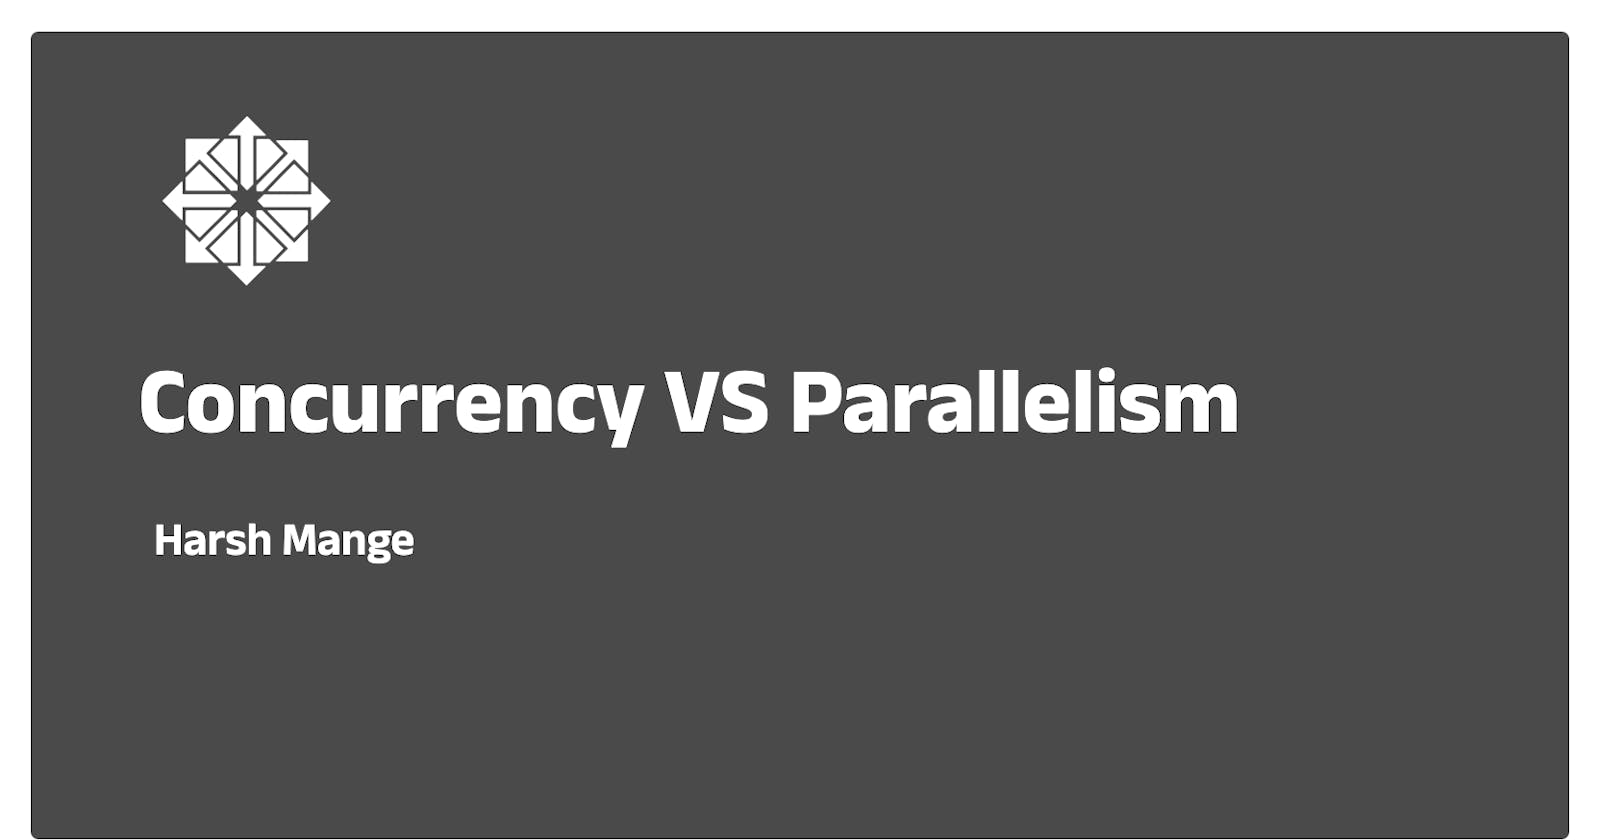 Understanding the Difference Between Concurrency and Parallelism